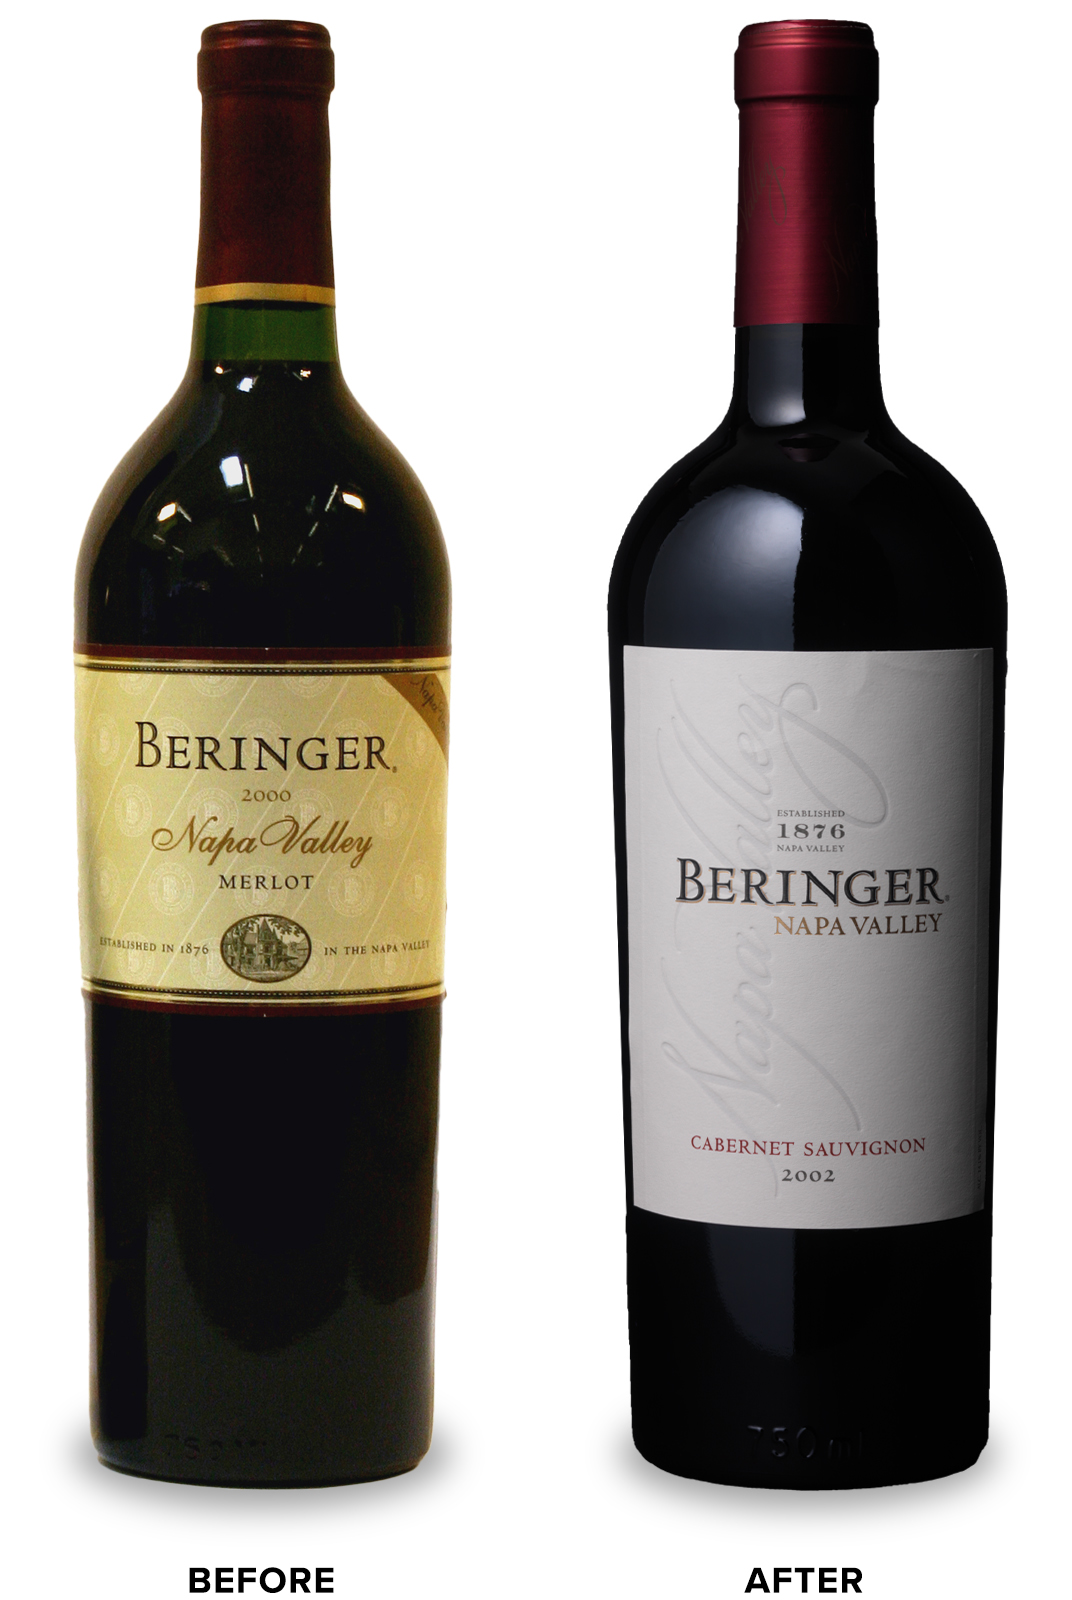 Beringer Knight’s Valley Wine Packaging Before Redesign on Left & After on Right